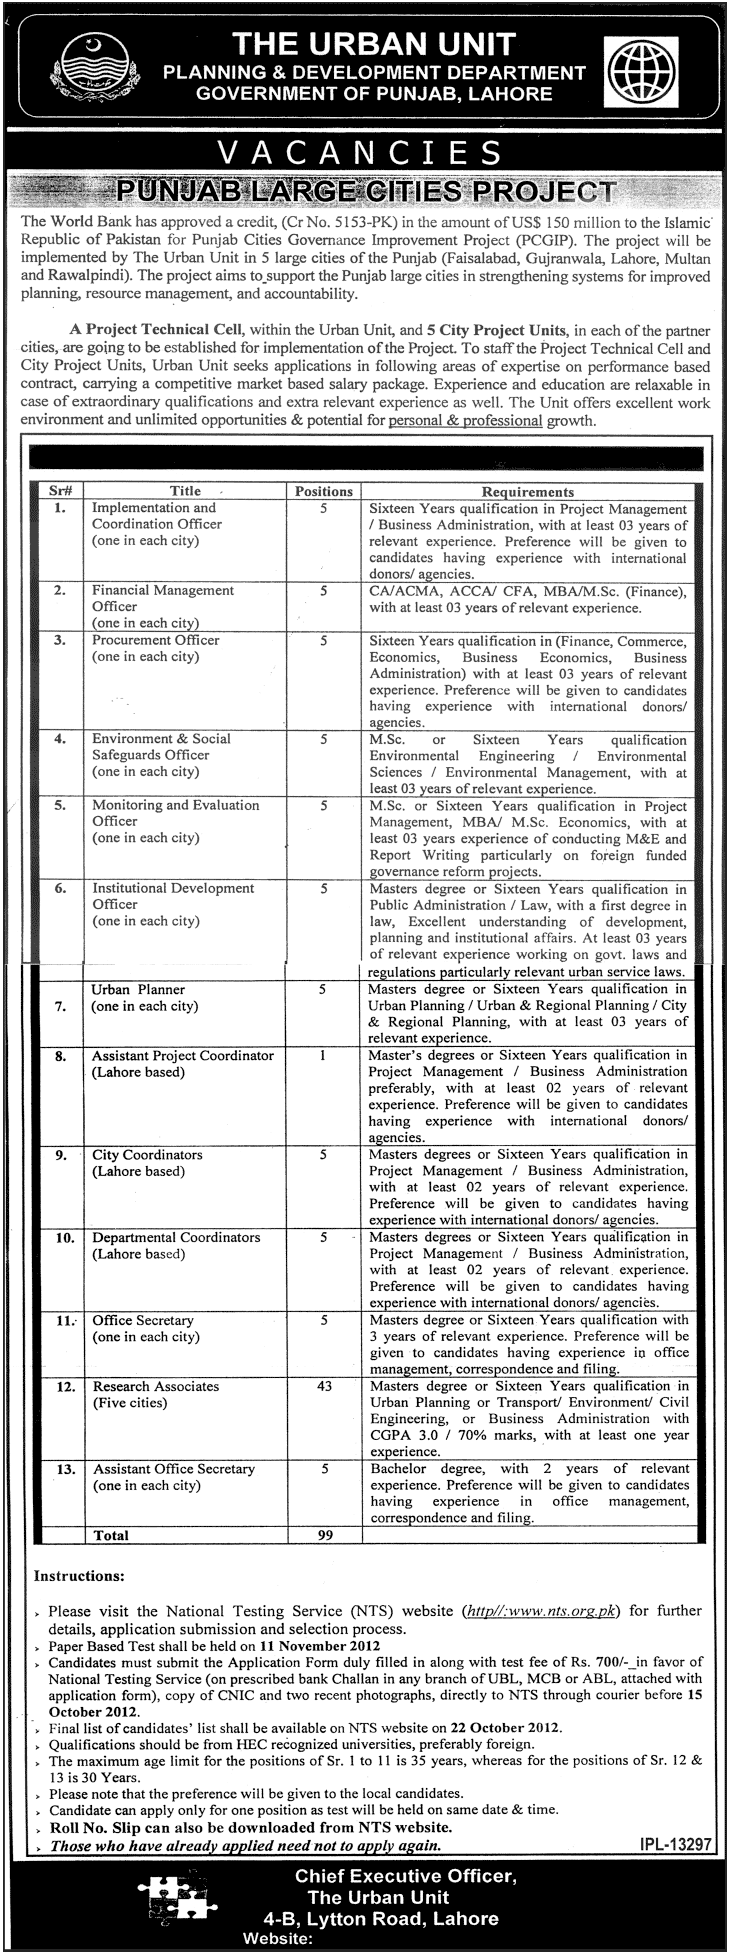 Planning & Development Department Government of Punjab Requires Management Staff for Punjab Large Cities Project (Government Job)